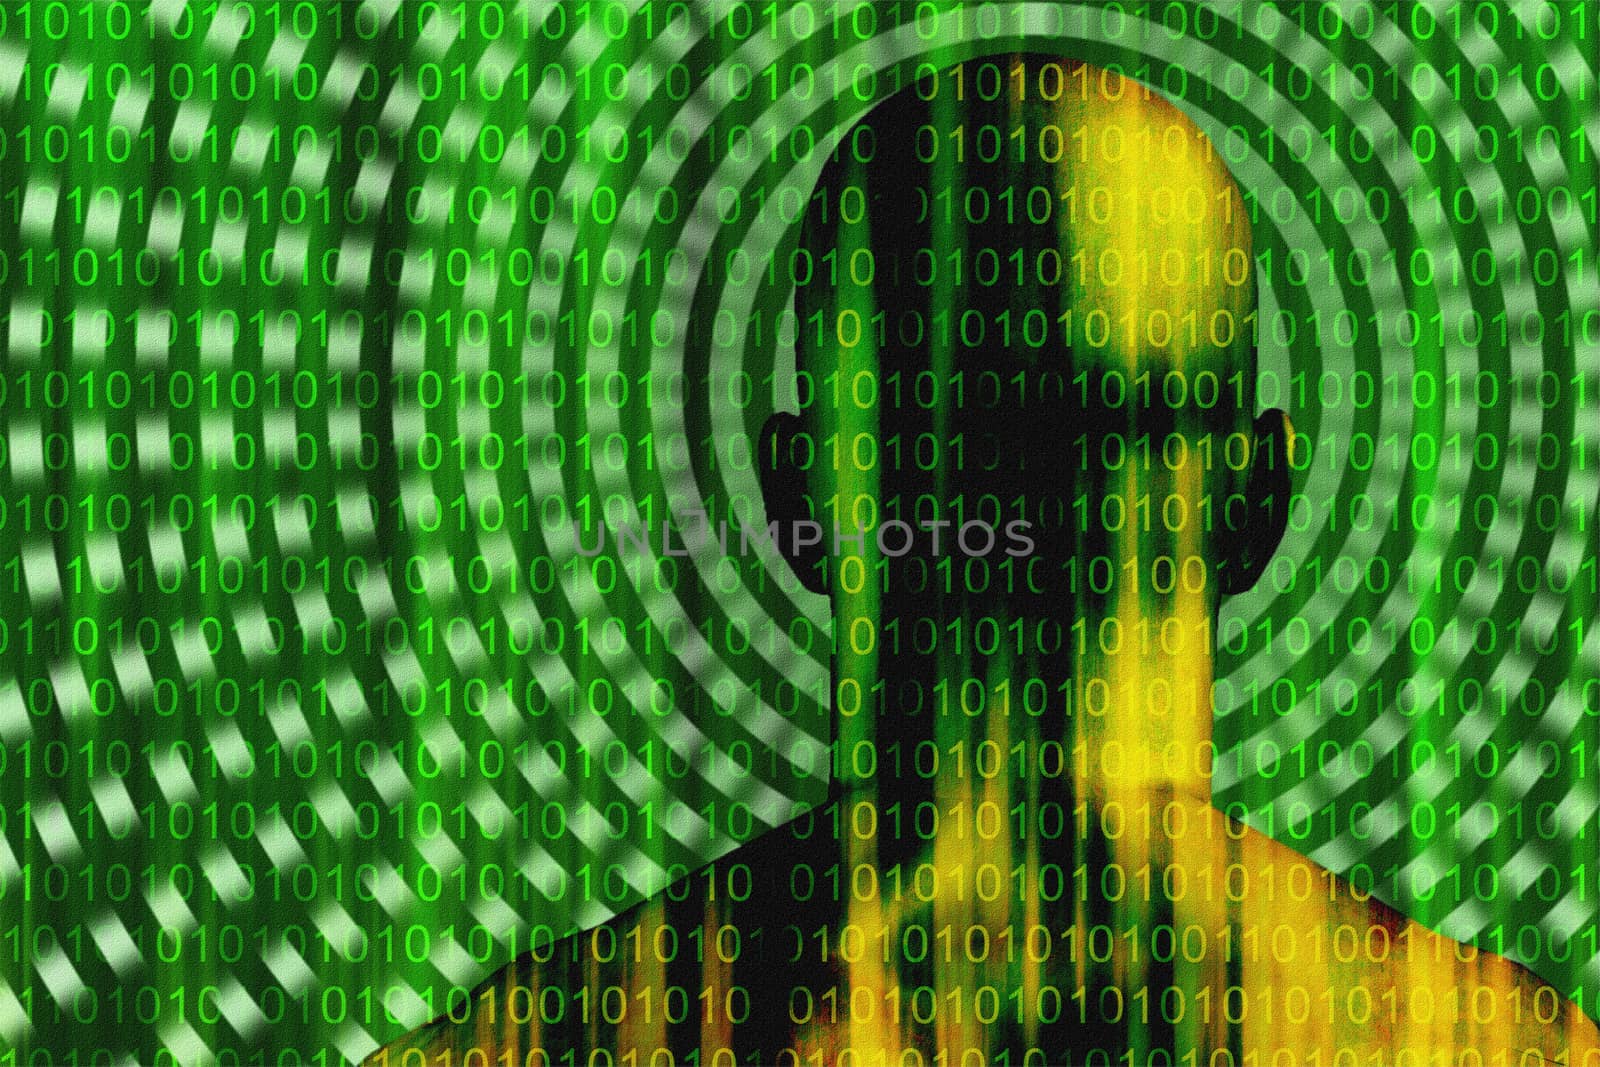 Surreal digital art. Well built man with binary code on a skin.